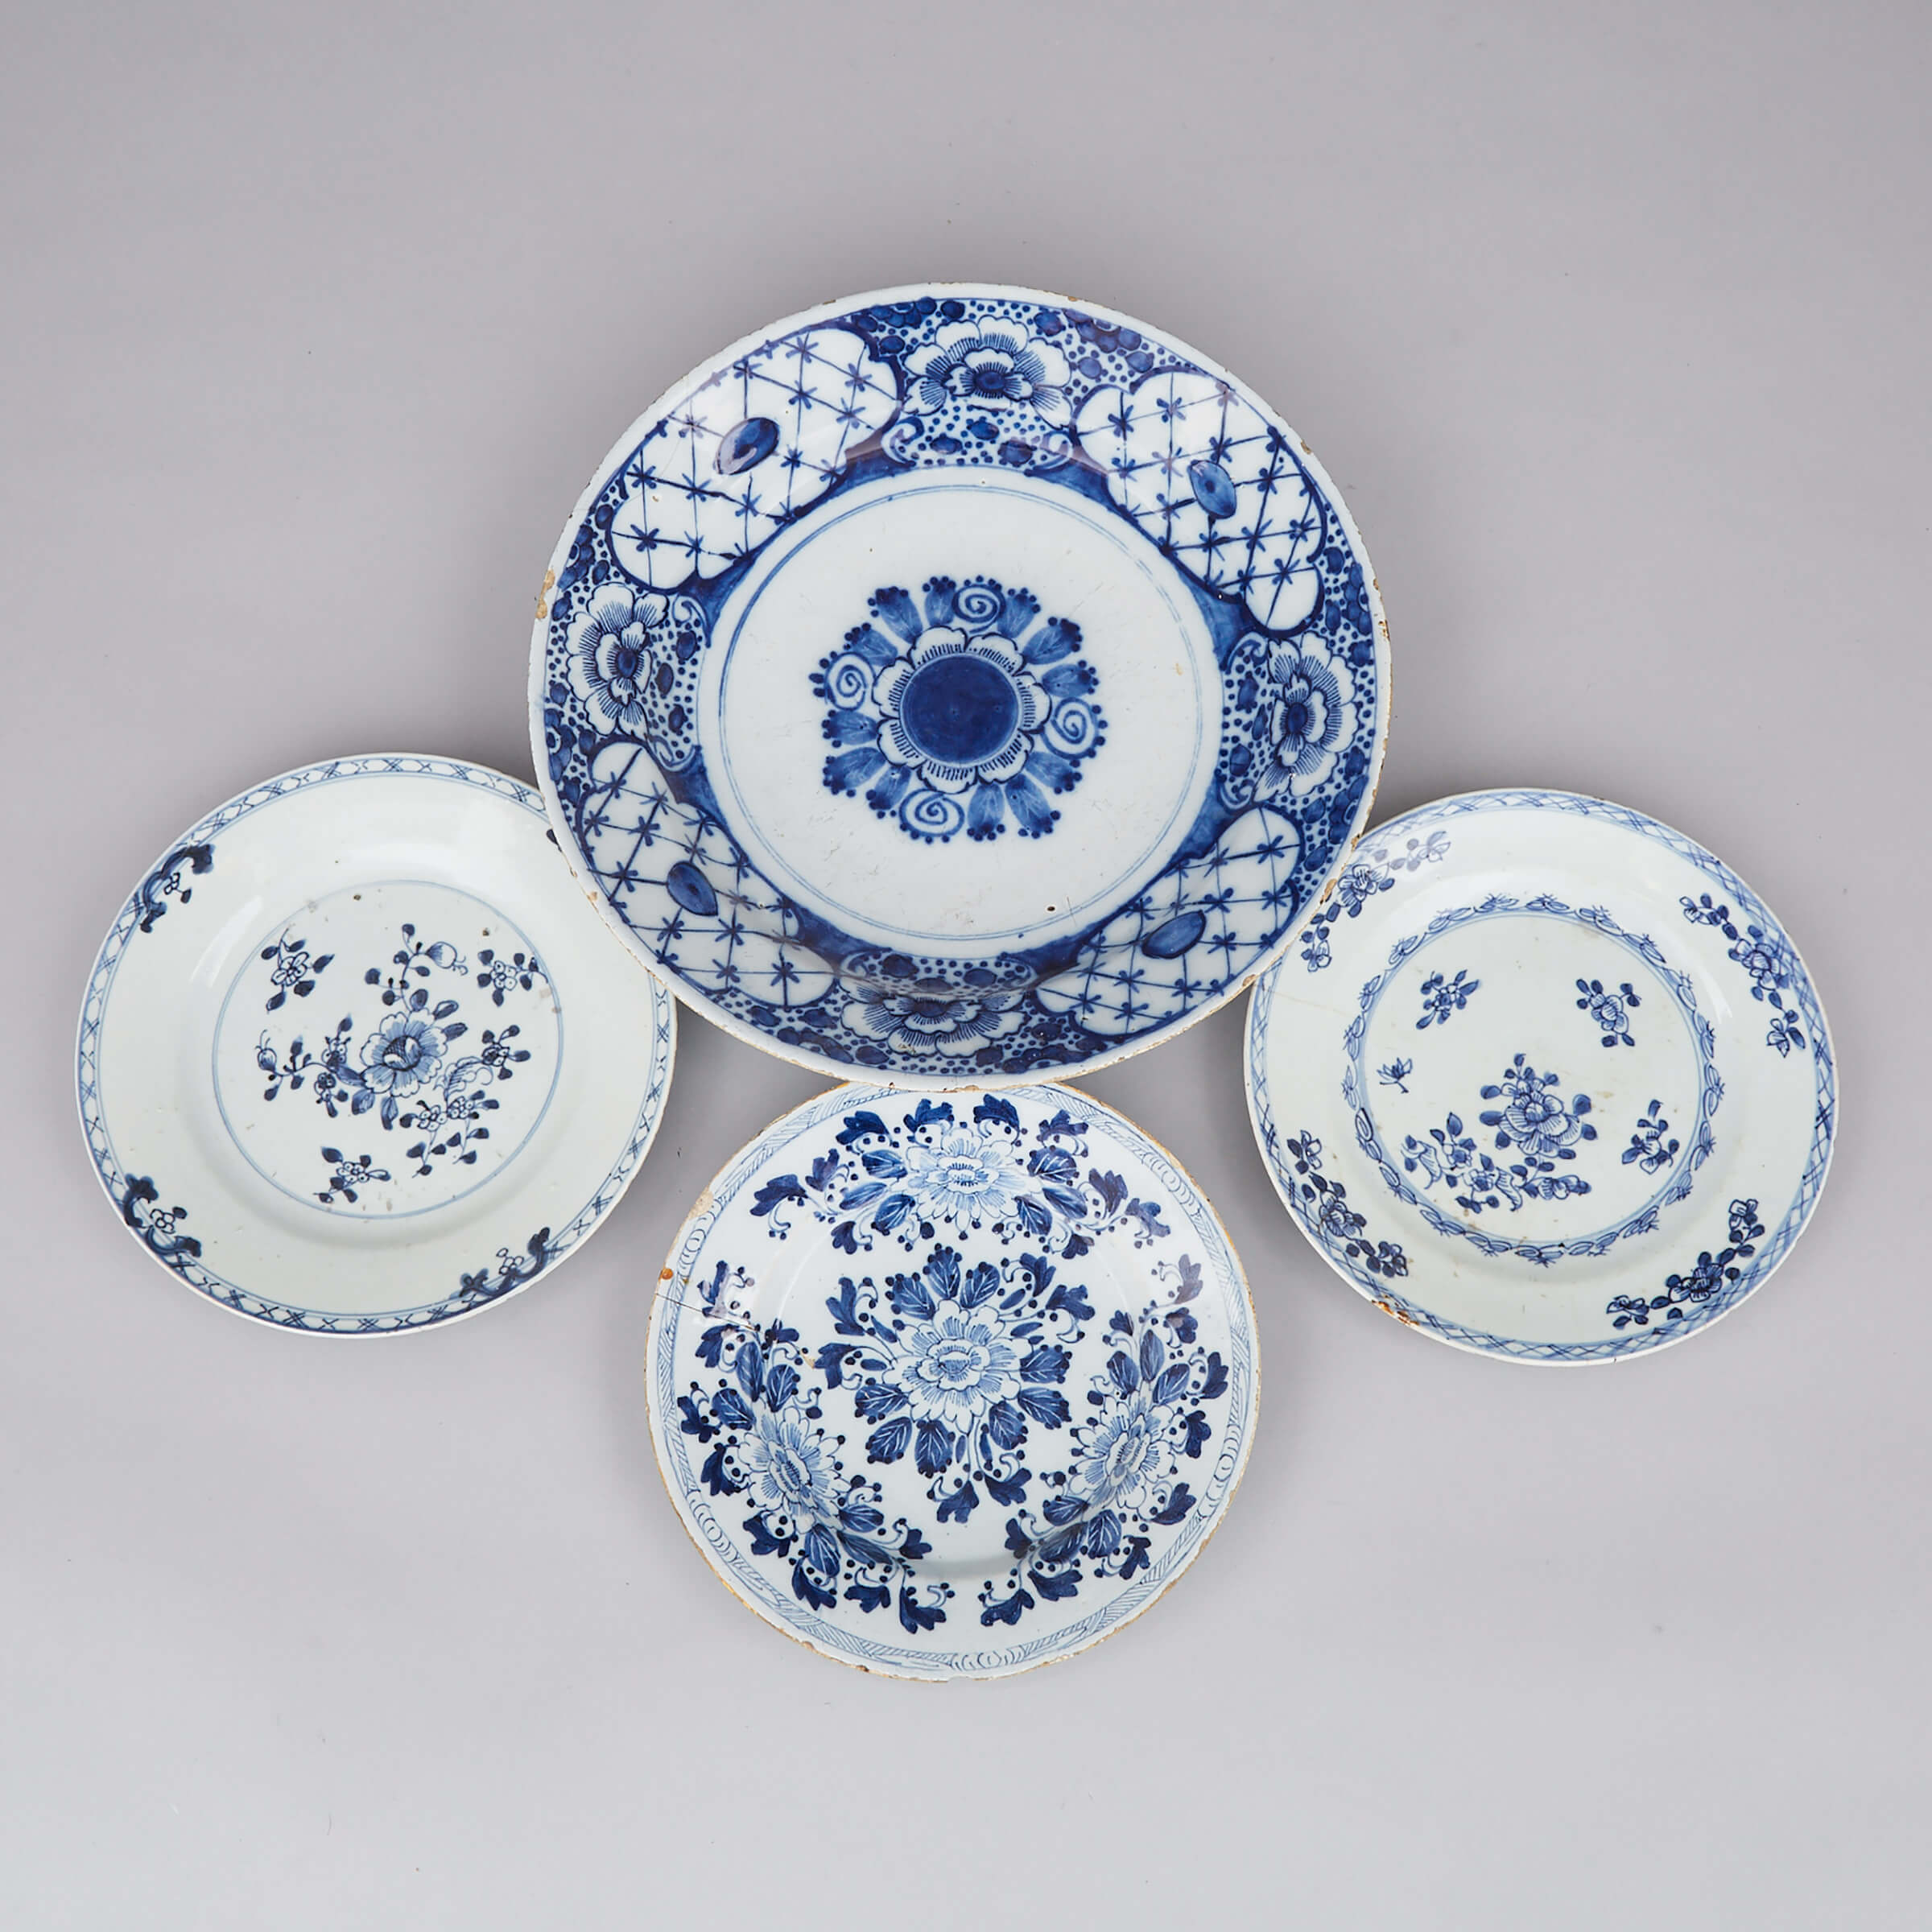 Dutch Delft Blue Painted Charger and Three Plates, 18th century